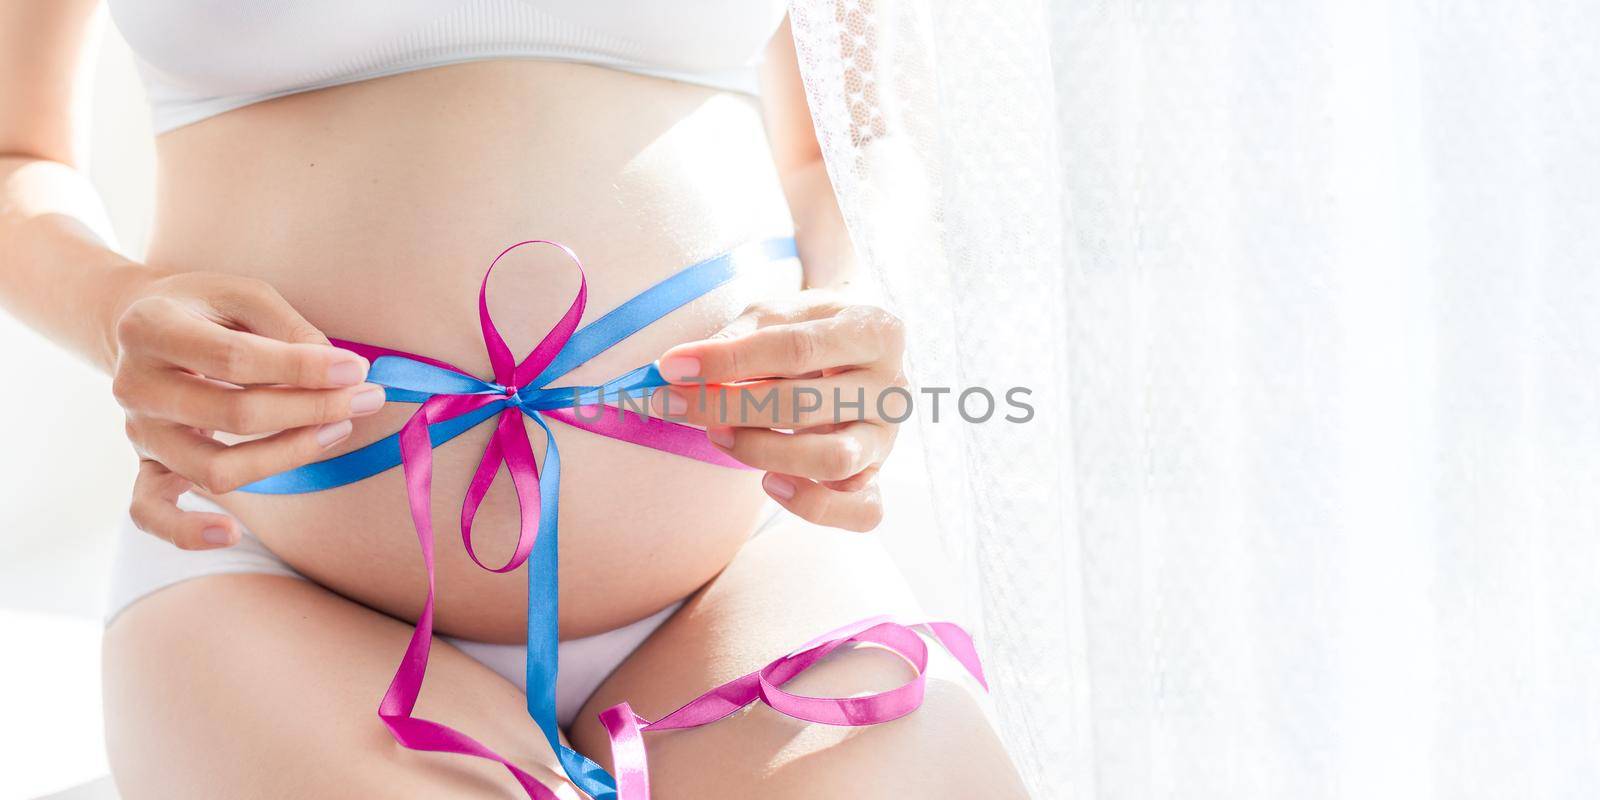 Pregnant woman in white underwear with blue and pink tied bow on belly. Woman in lingerie is expecting twins - boy and girl. Or woman doesn't know sex of future baby.